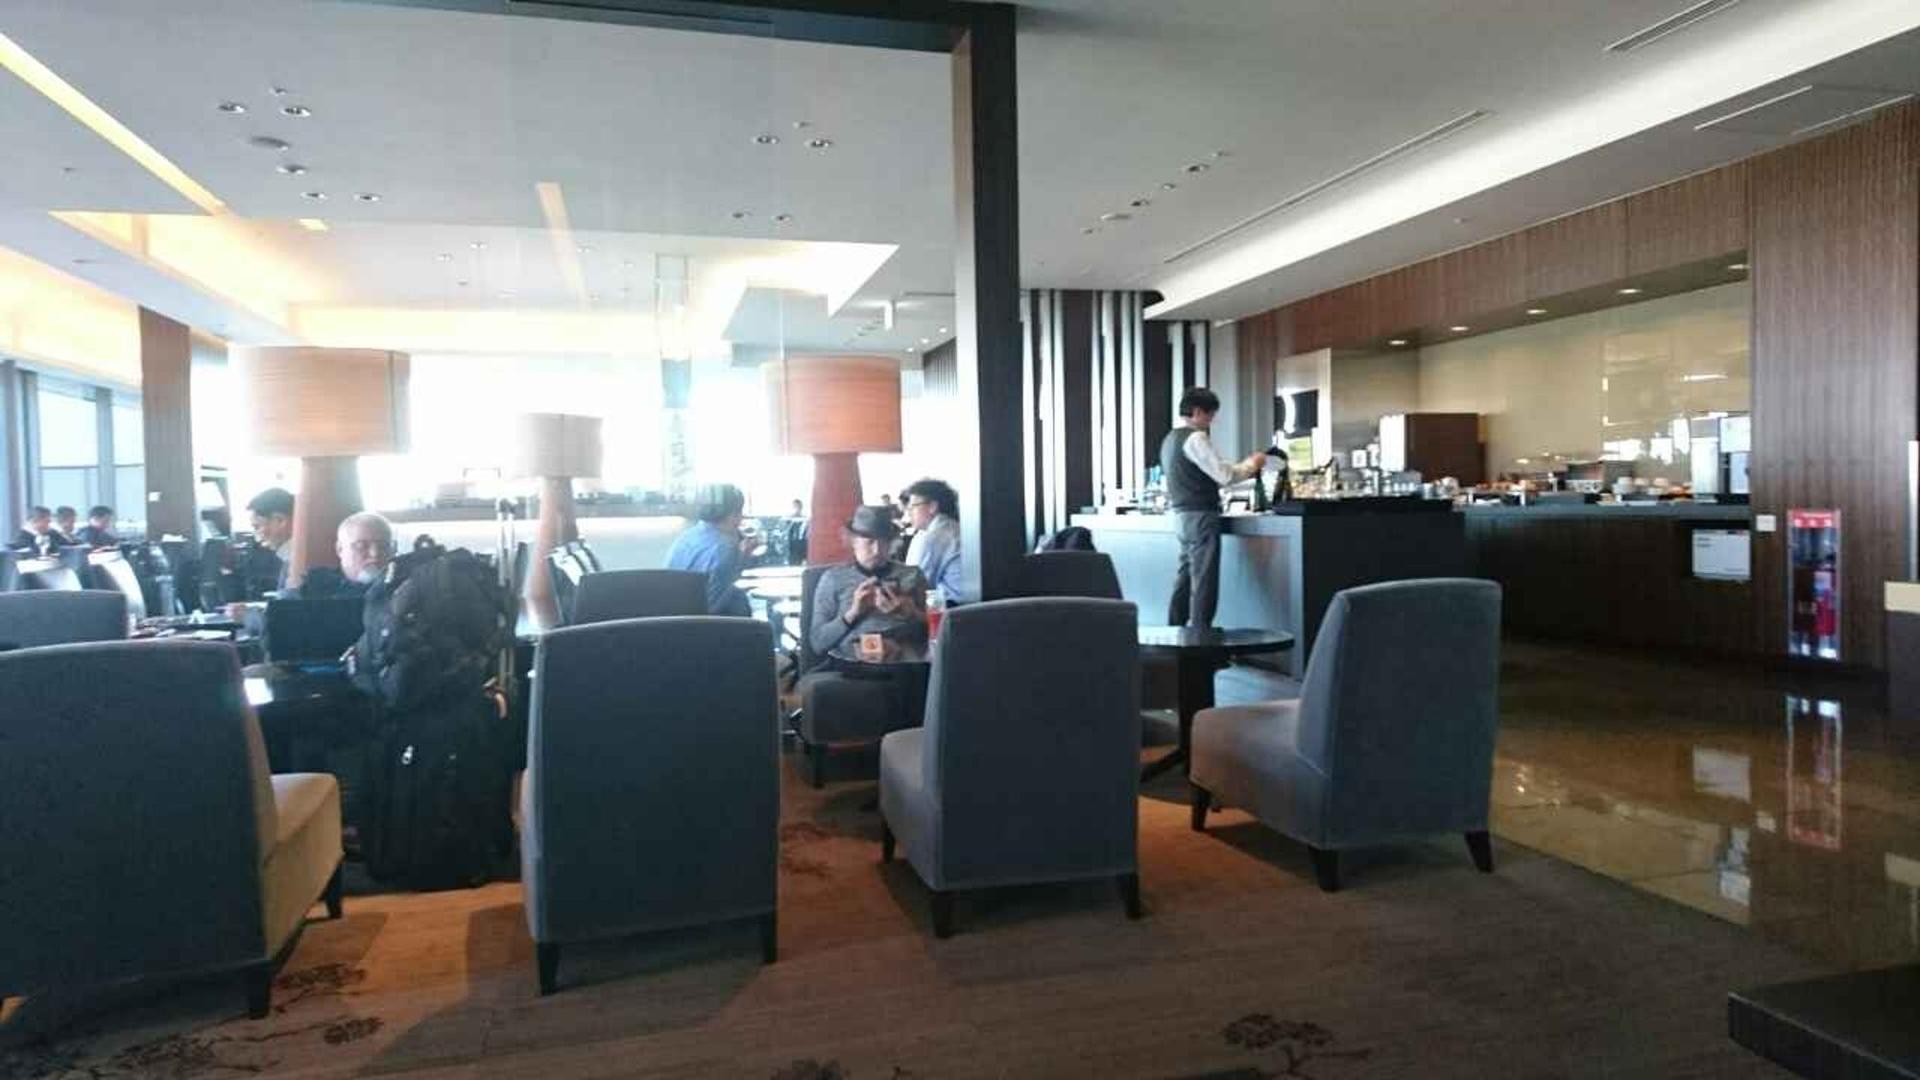 Japan Airlines JAL First Class Lounge image 37 of 50